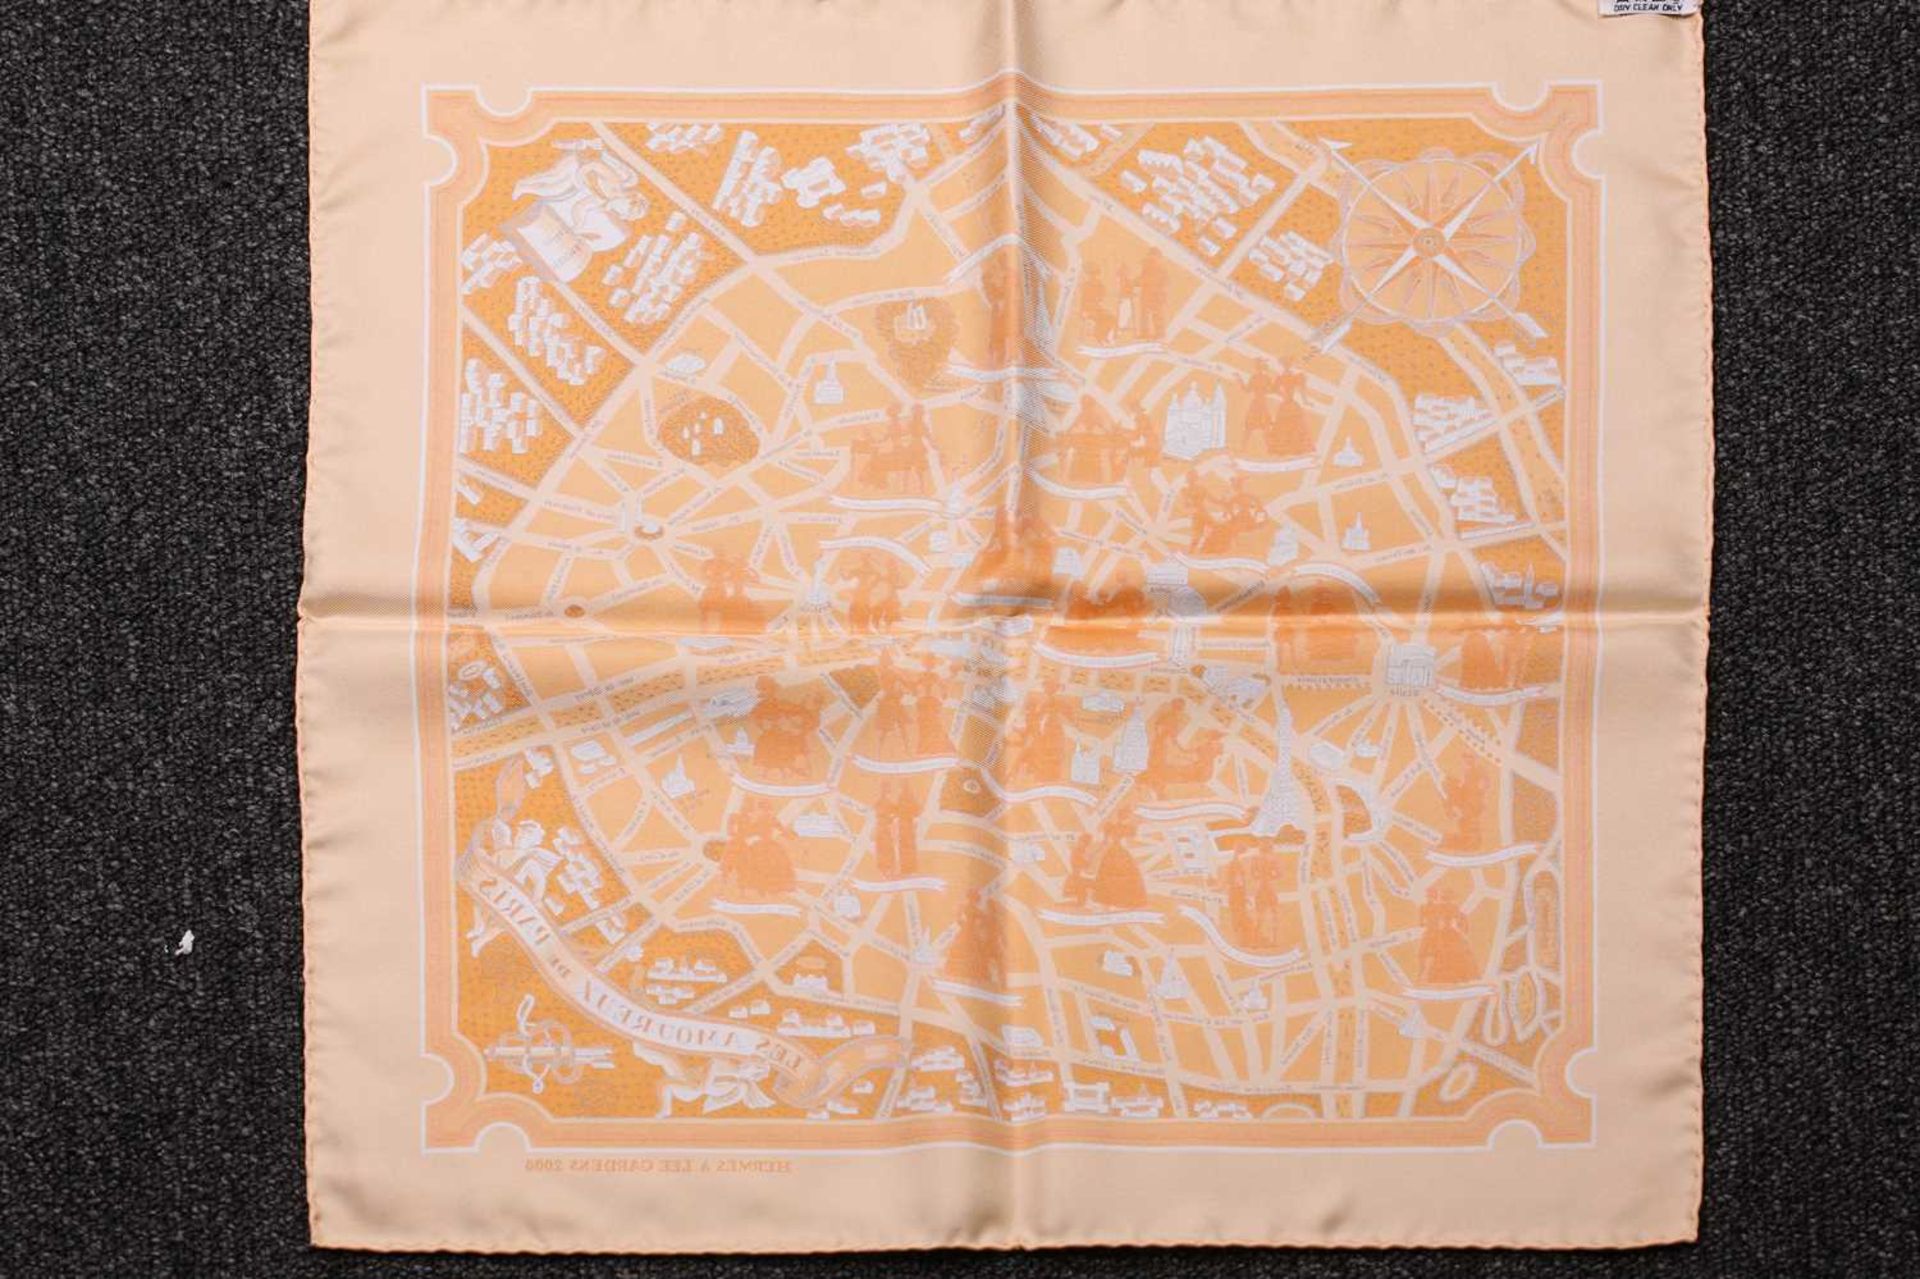 Two Hermes silk scarves; Les Amoreux de Paris limited edition to commemorate Hermes reopening the - Image 13 of 17